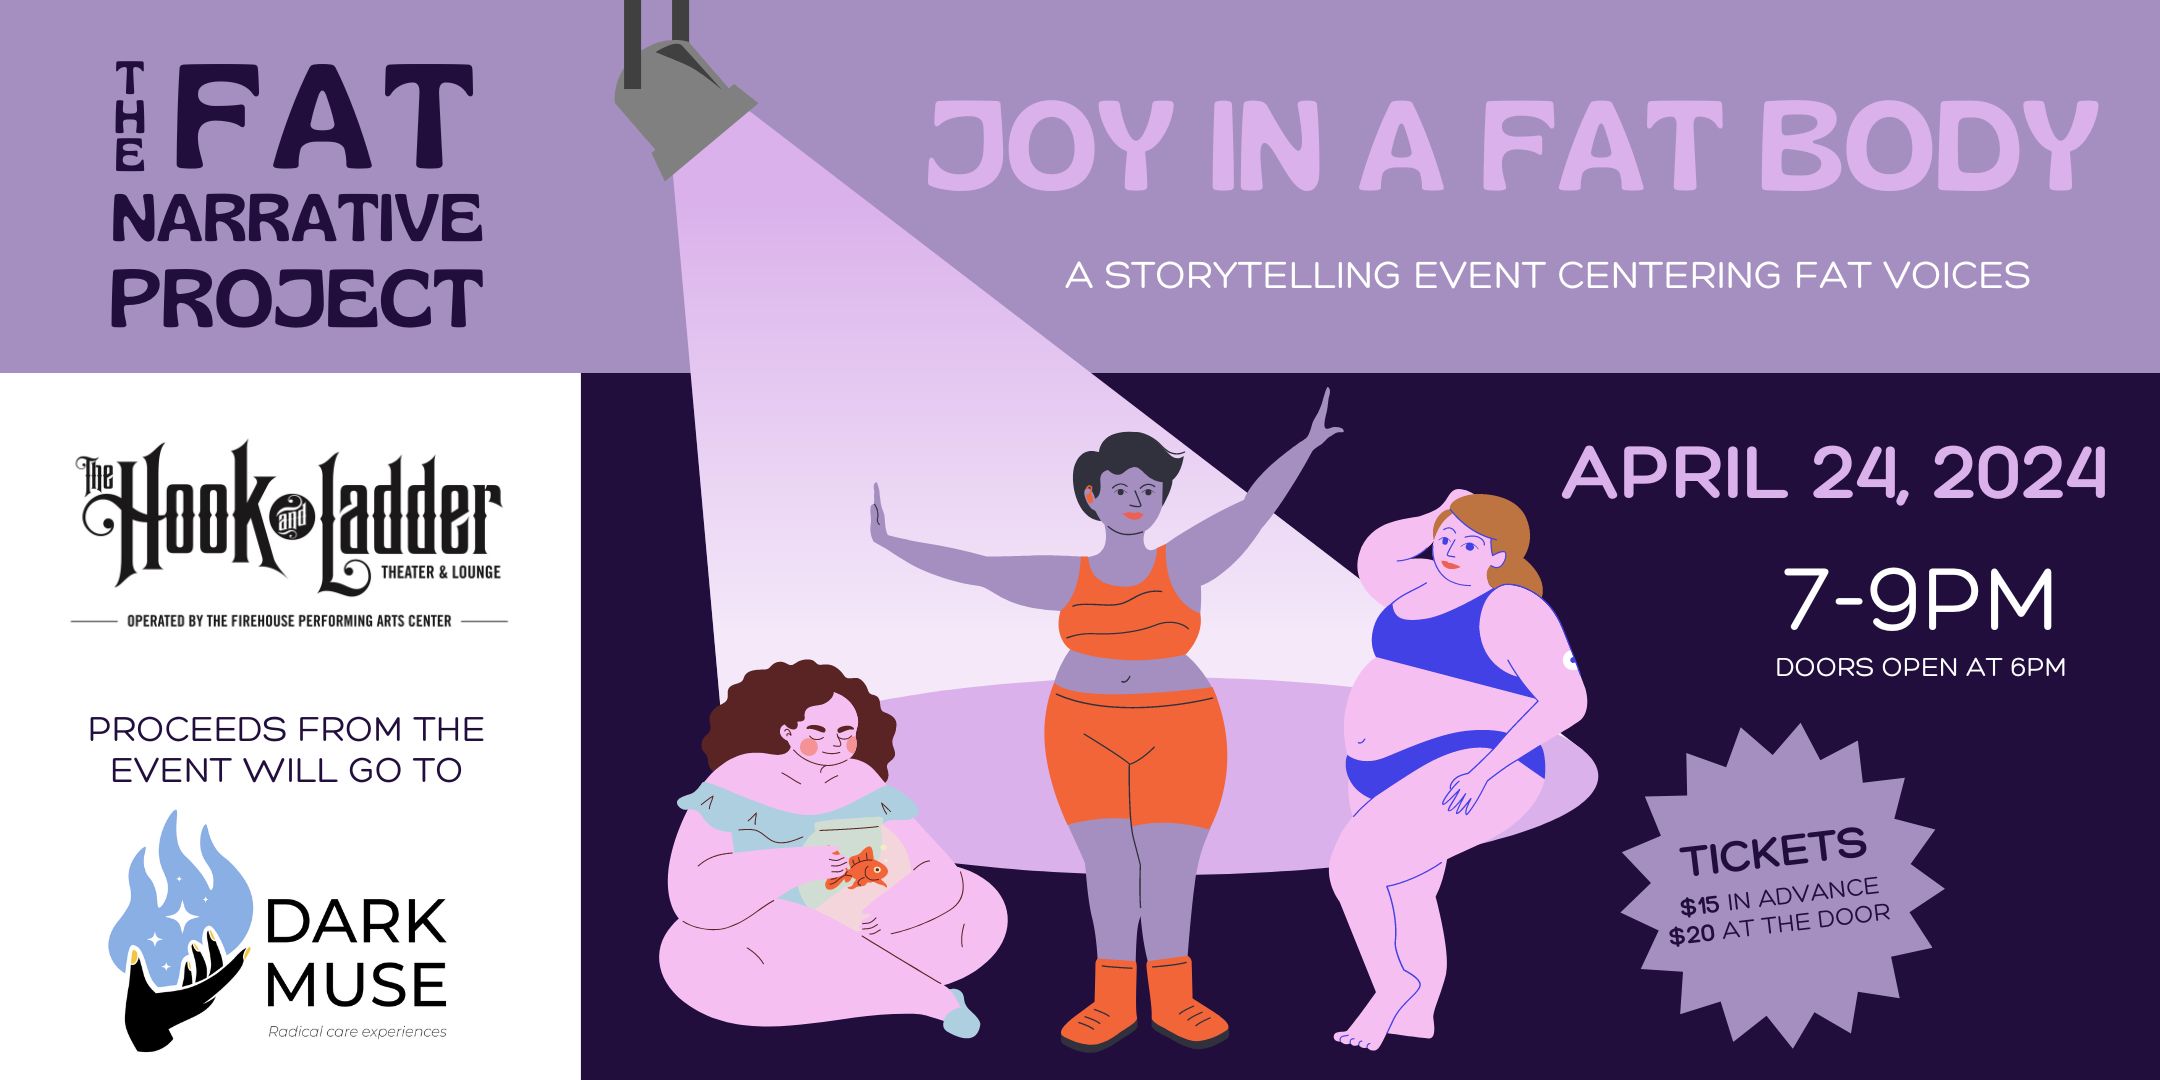 The Fat Narrative Project Joy in a Fat Body Wednesday April 24 The Hook and Ladder Theater Doors/Reception: 6:00pm :: Start 7:00pm :: 21+ General Admission $15 ADV / $20 DOS Donations Accepted at The Door